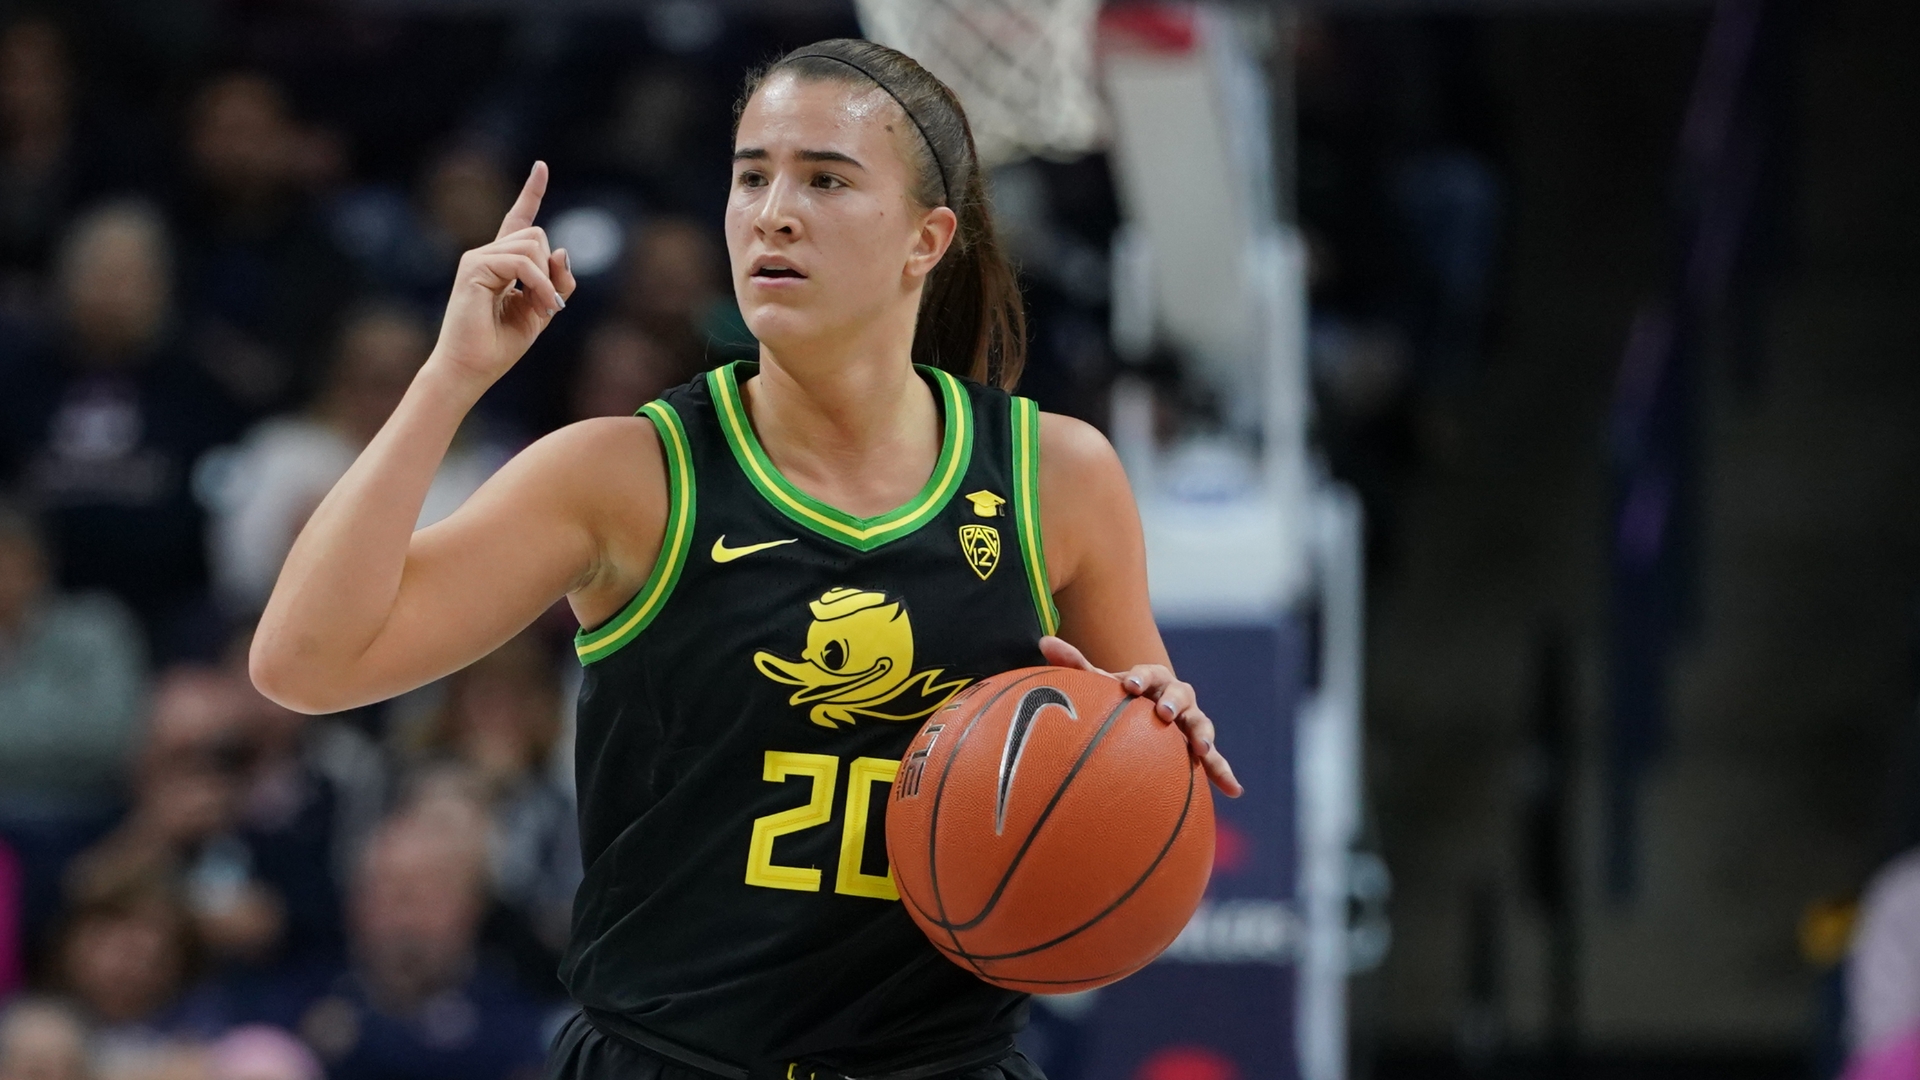 Ionescu has unfinished business in her senior season